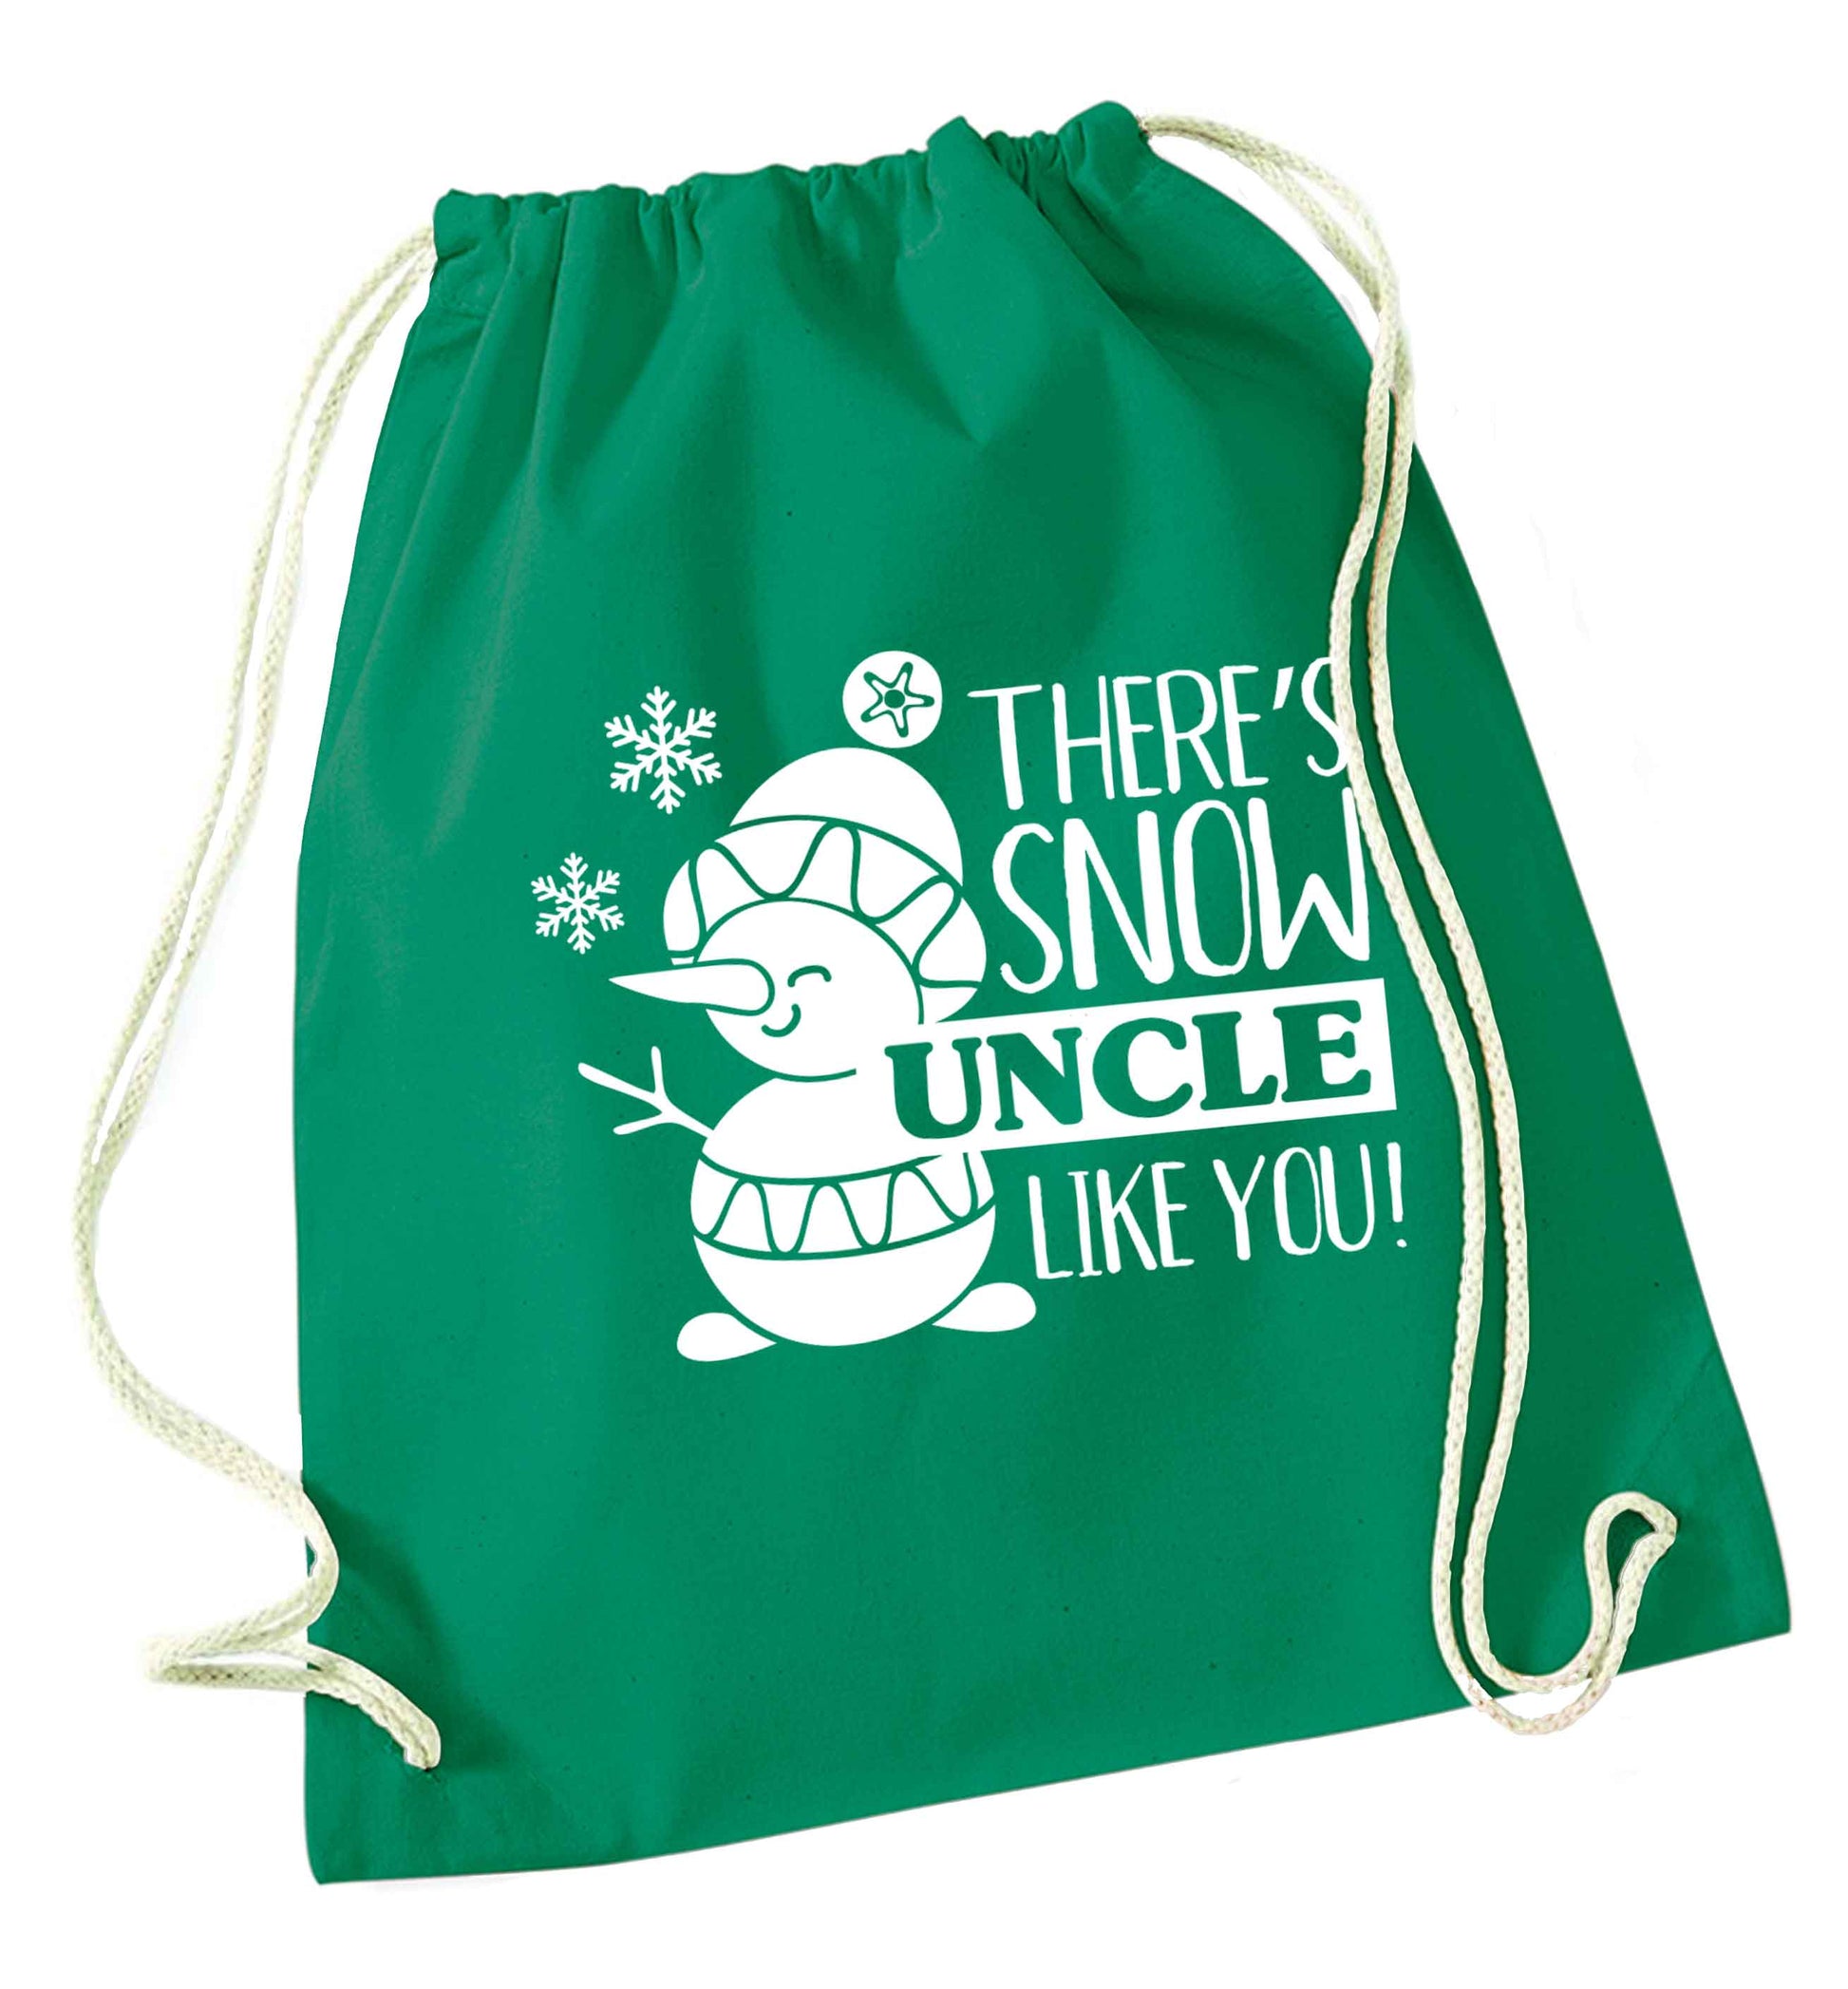 There's snow uncle like you green drawstring bag